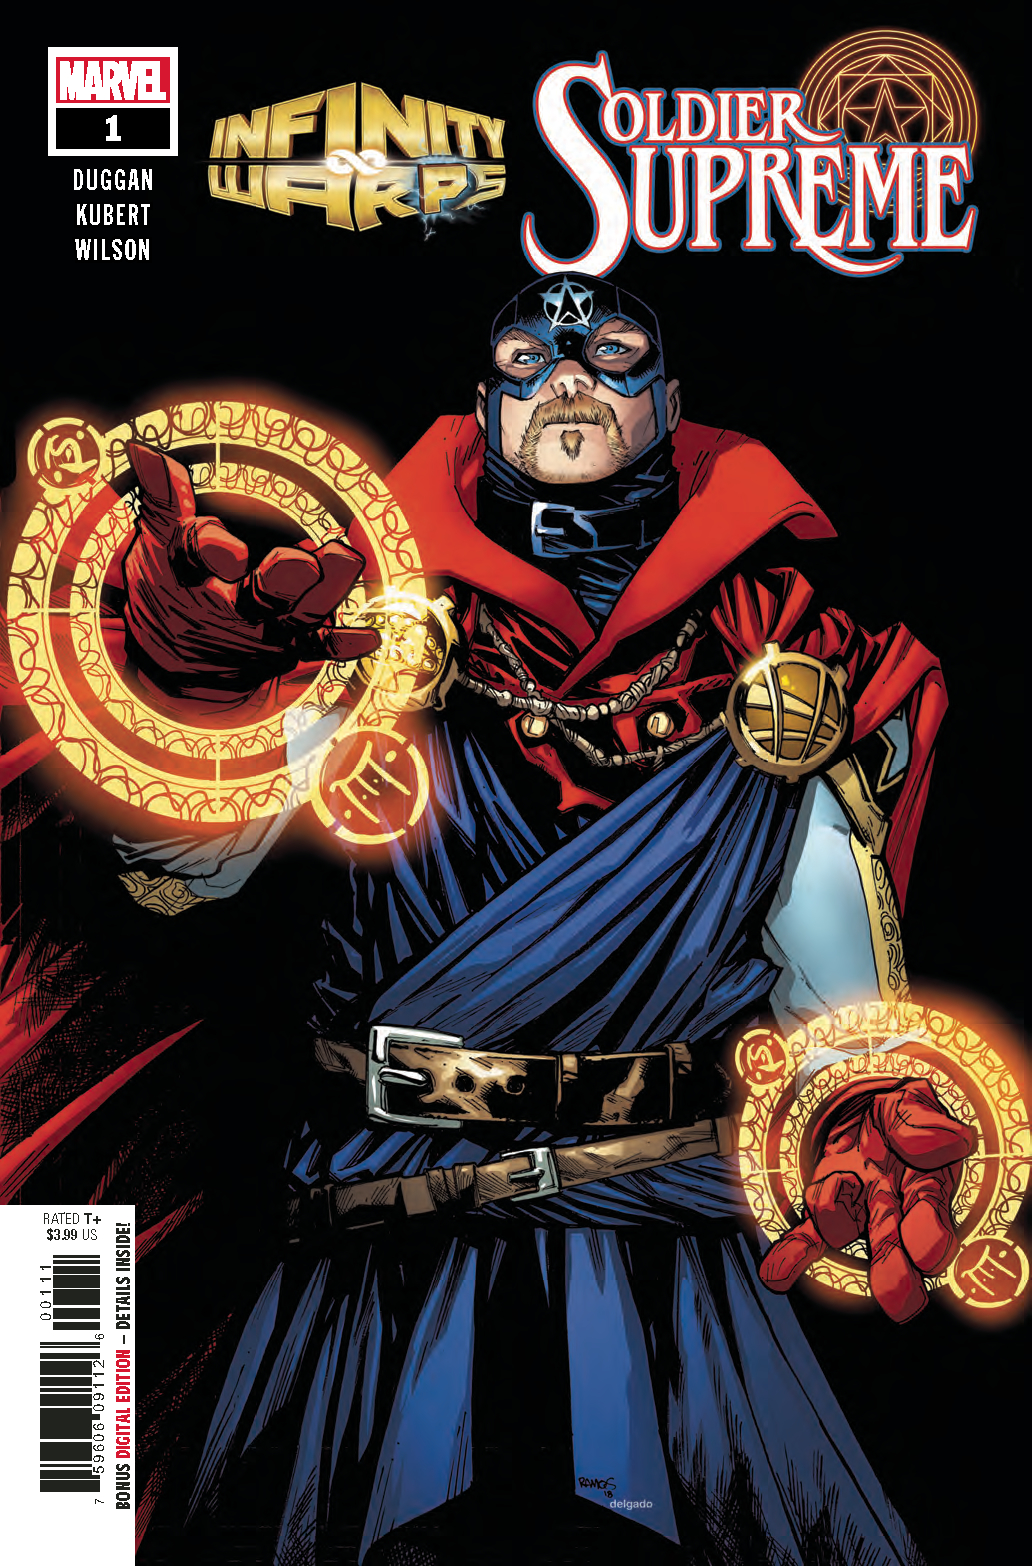 INFINITY WARS SOLDIER SUPREME #1 (OF 2)